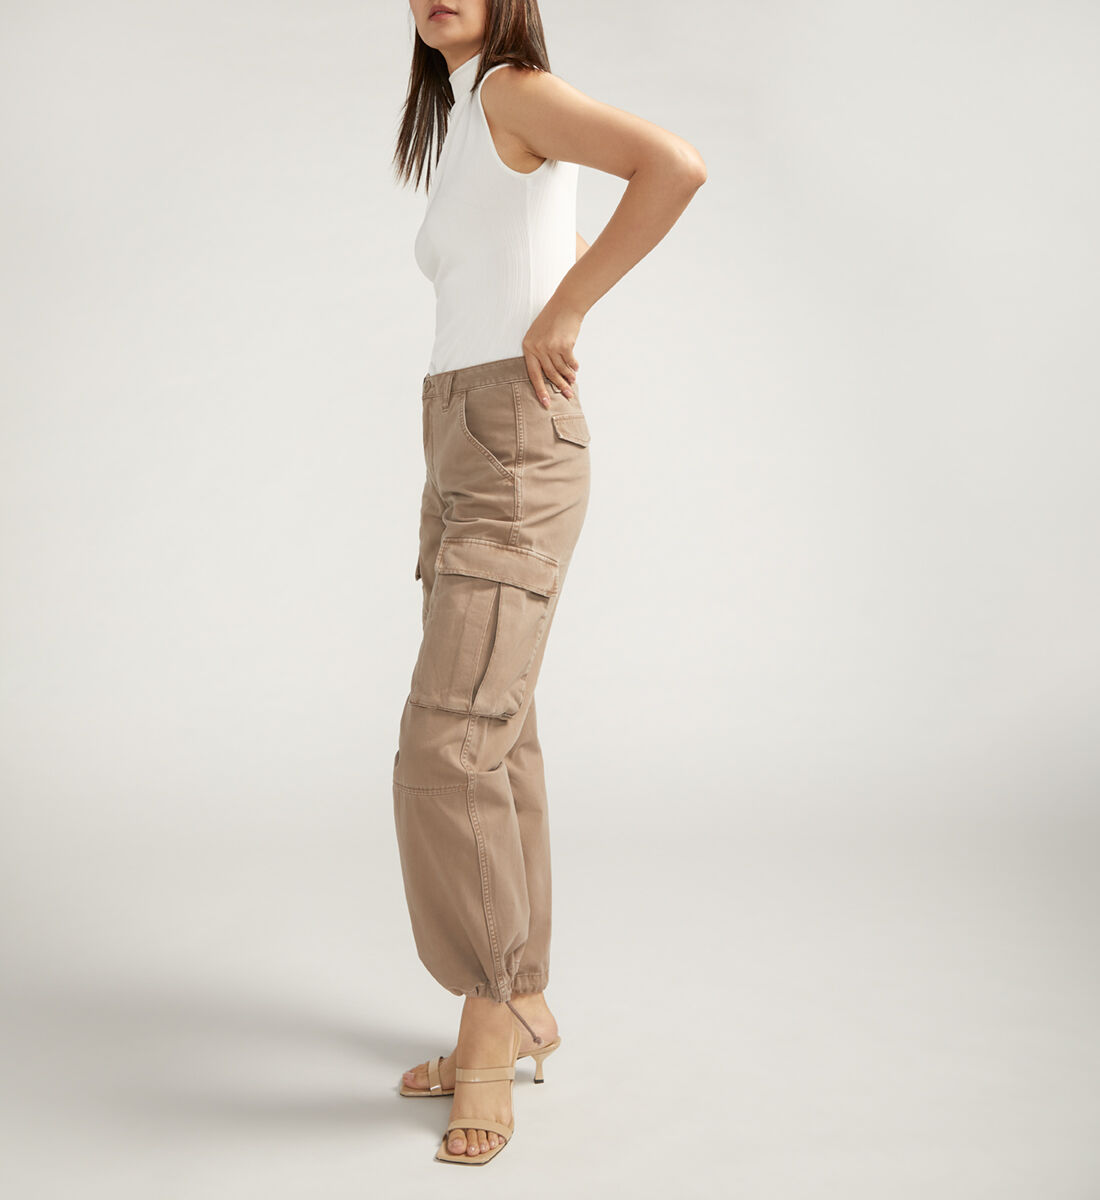 Buy Relaxed Fit Surplus Cargo Pant for USD 74.00 | Silver Jeans US New